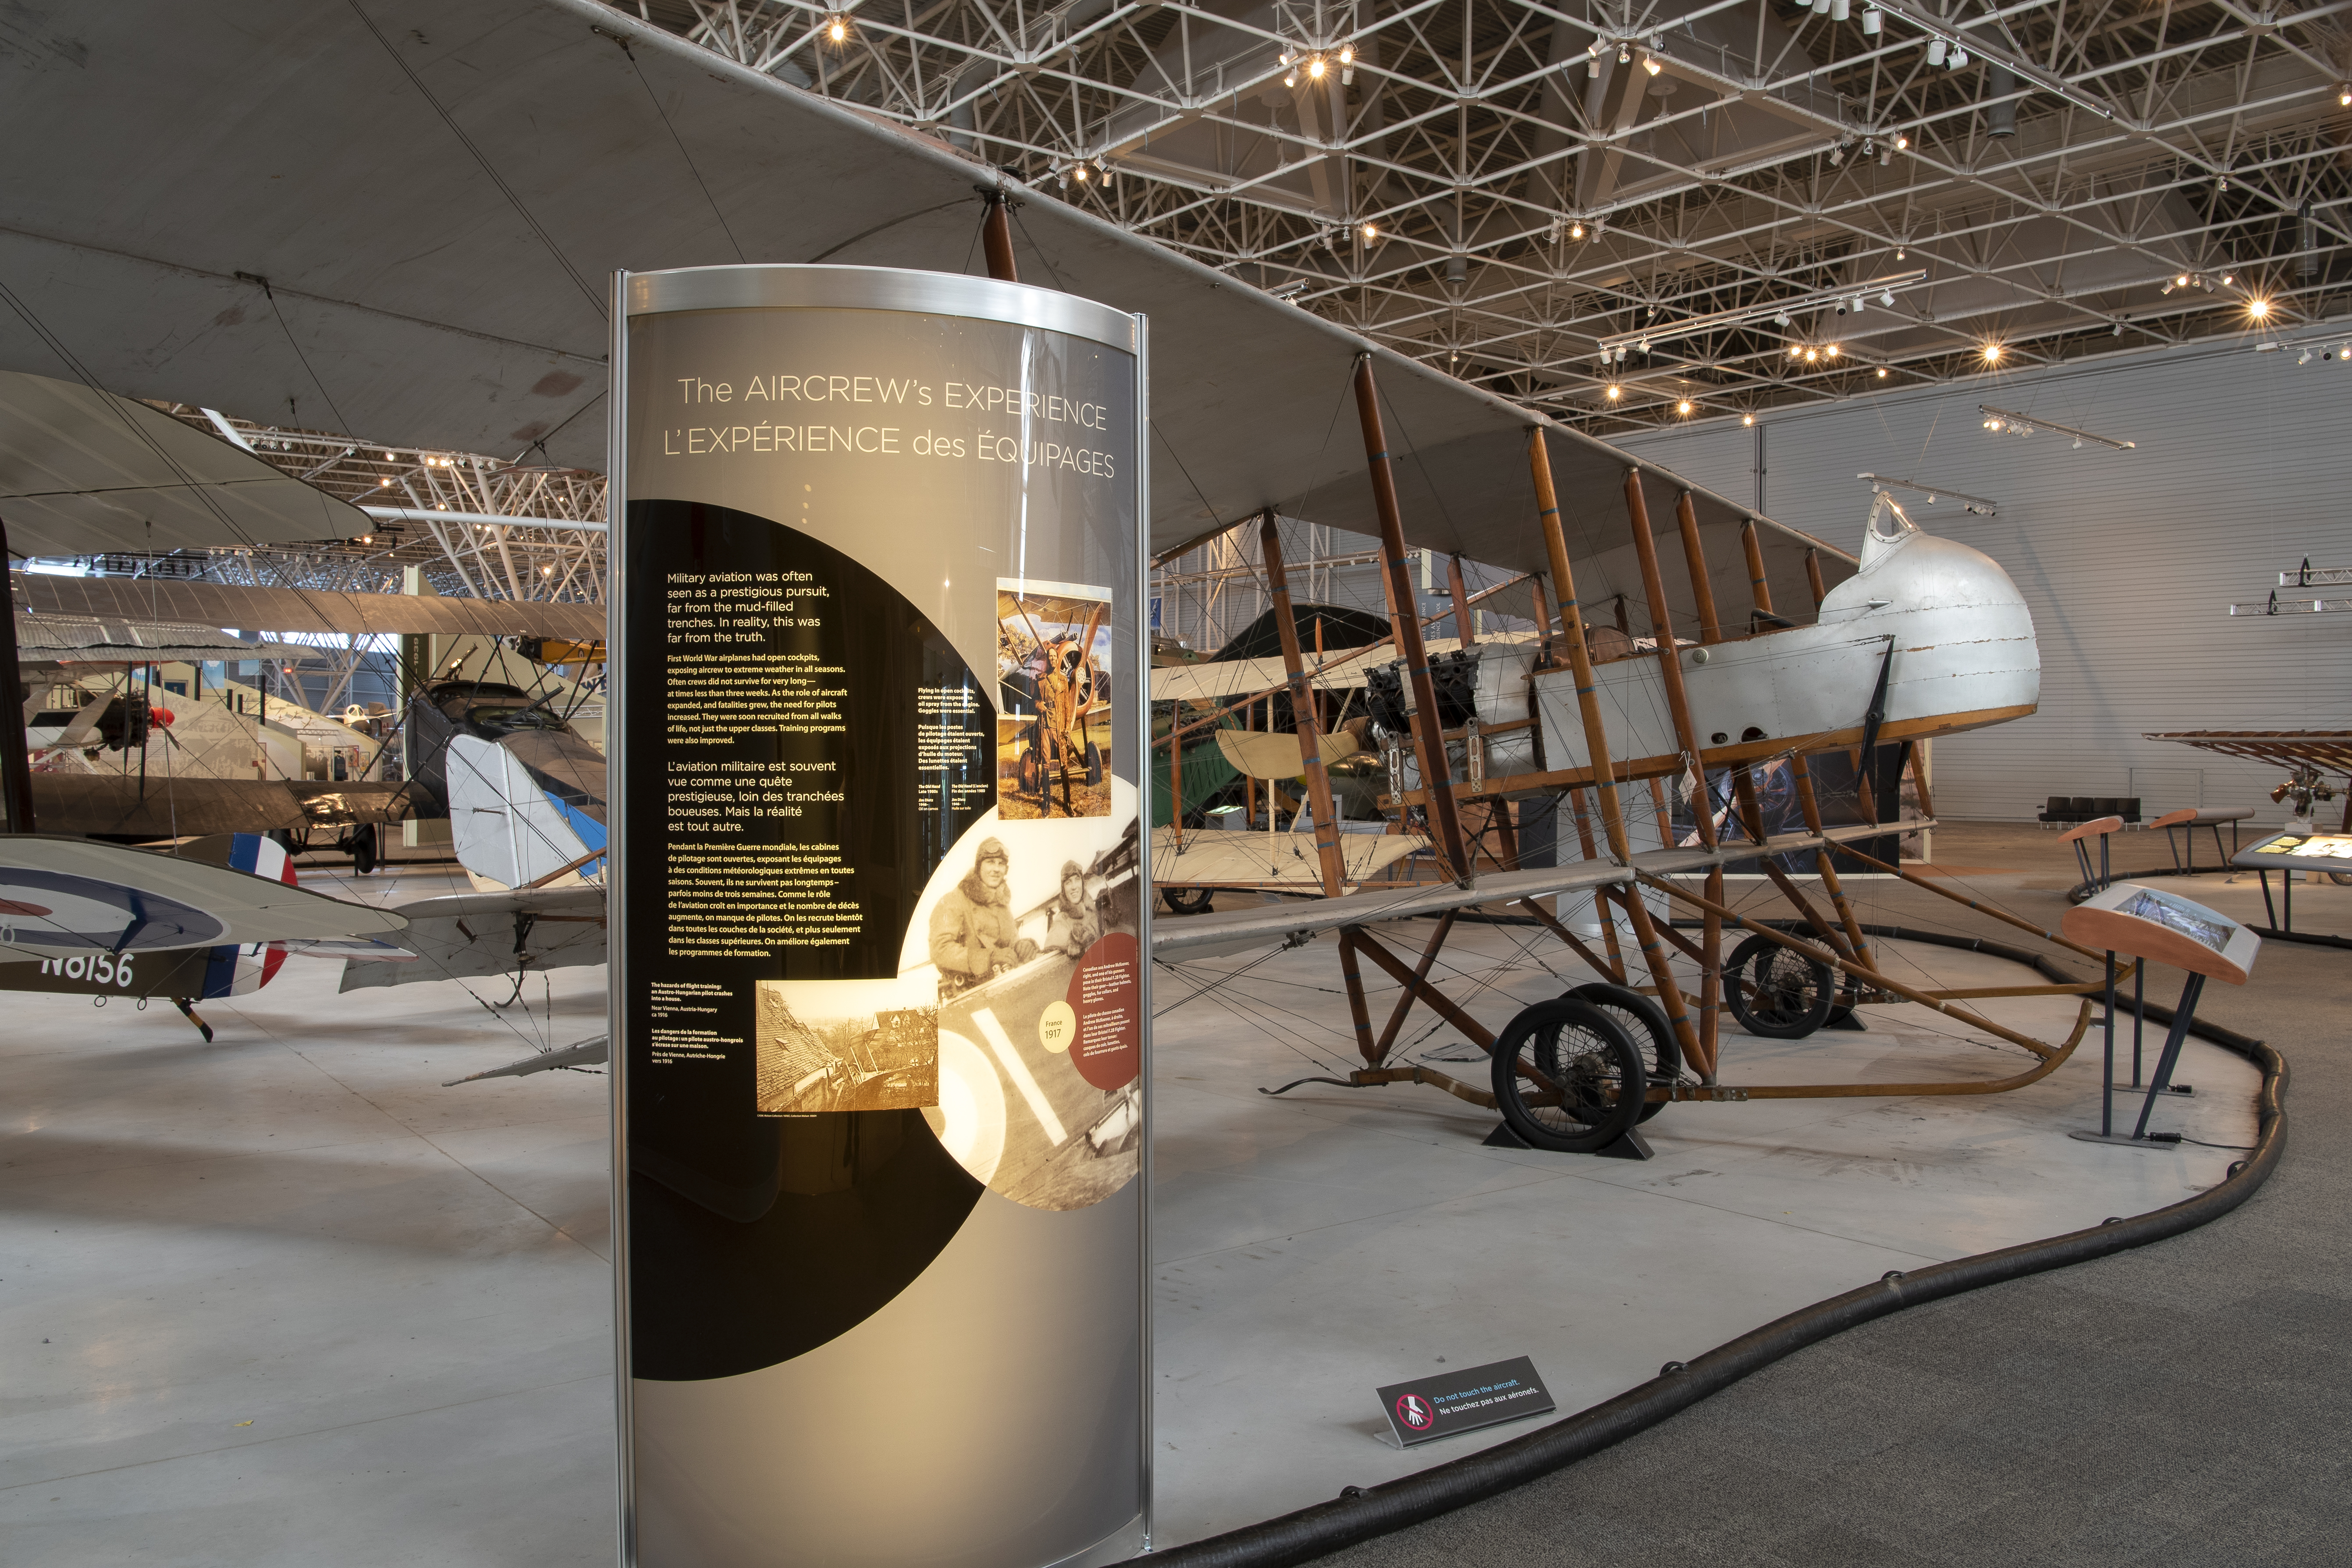 A sleek-looking panel stands in the foreground; in the background several aircraft are visible on the floor of the Canada Aviation and Space Museum.